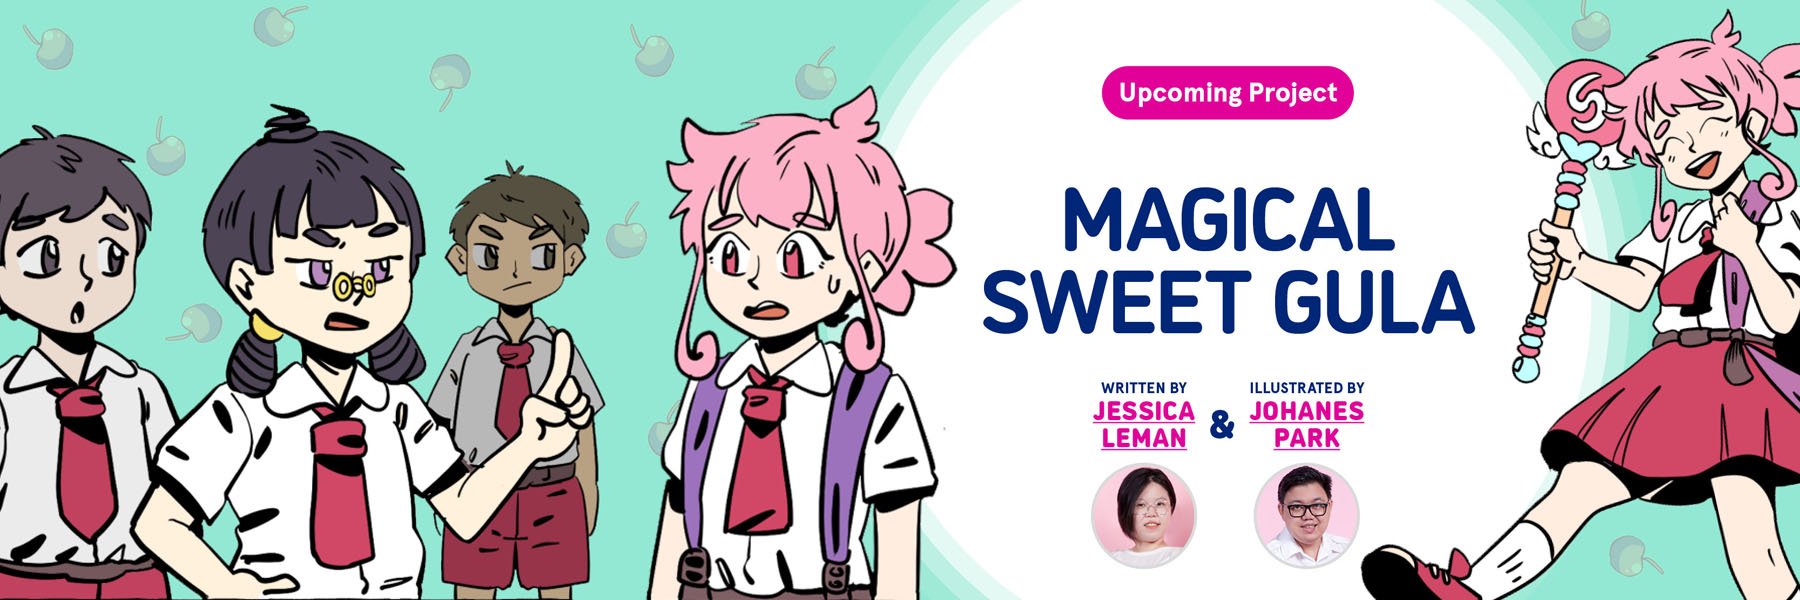 Upcoming Project for Magical Sweet Gula